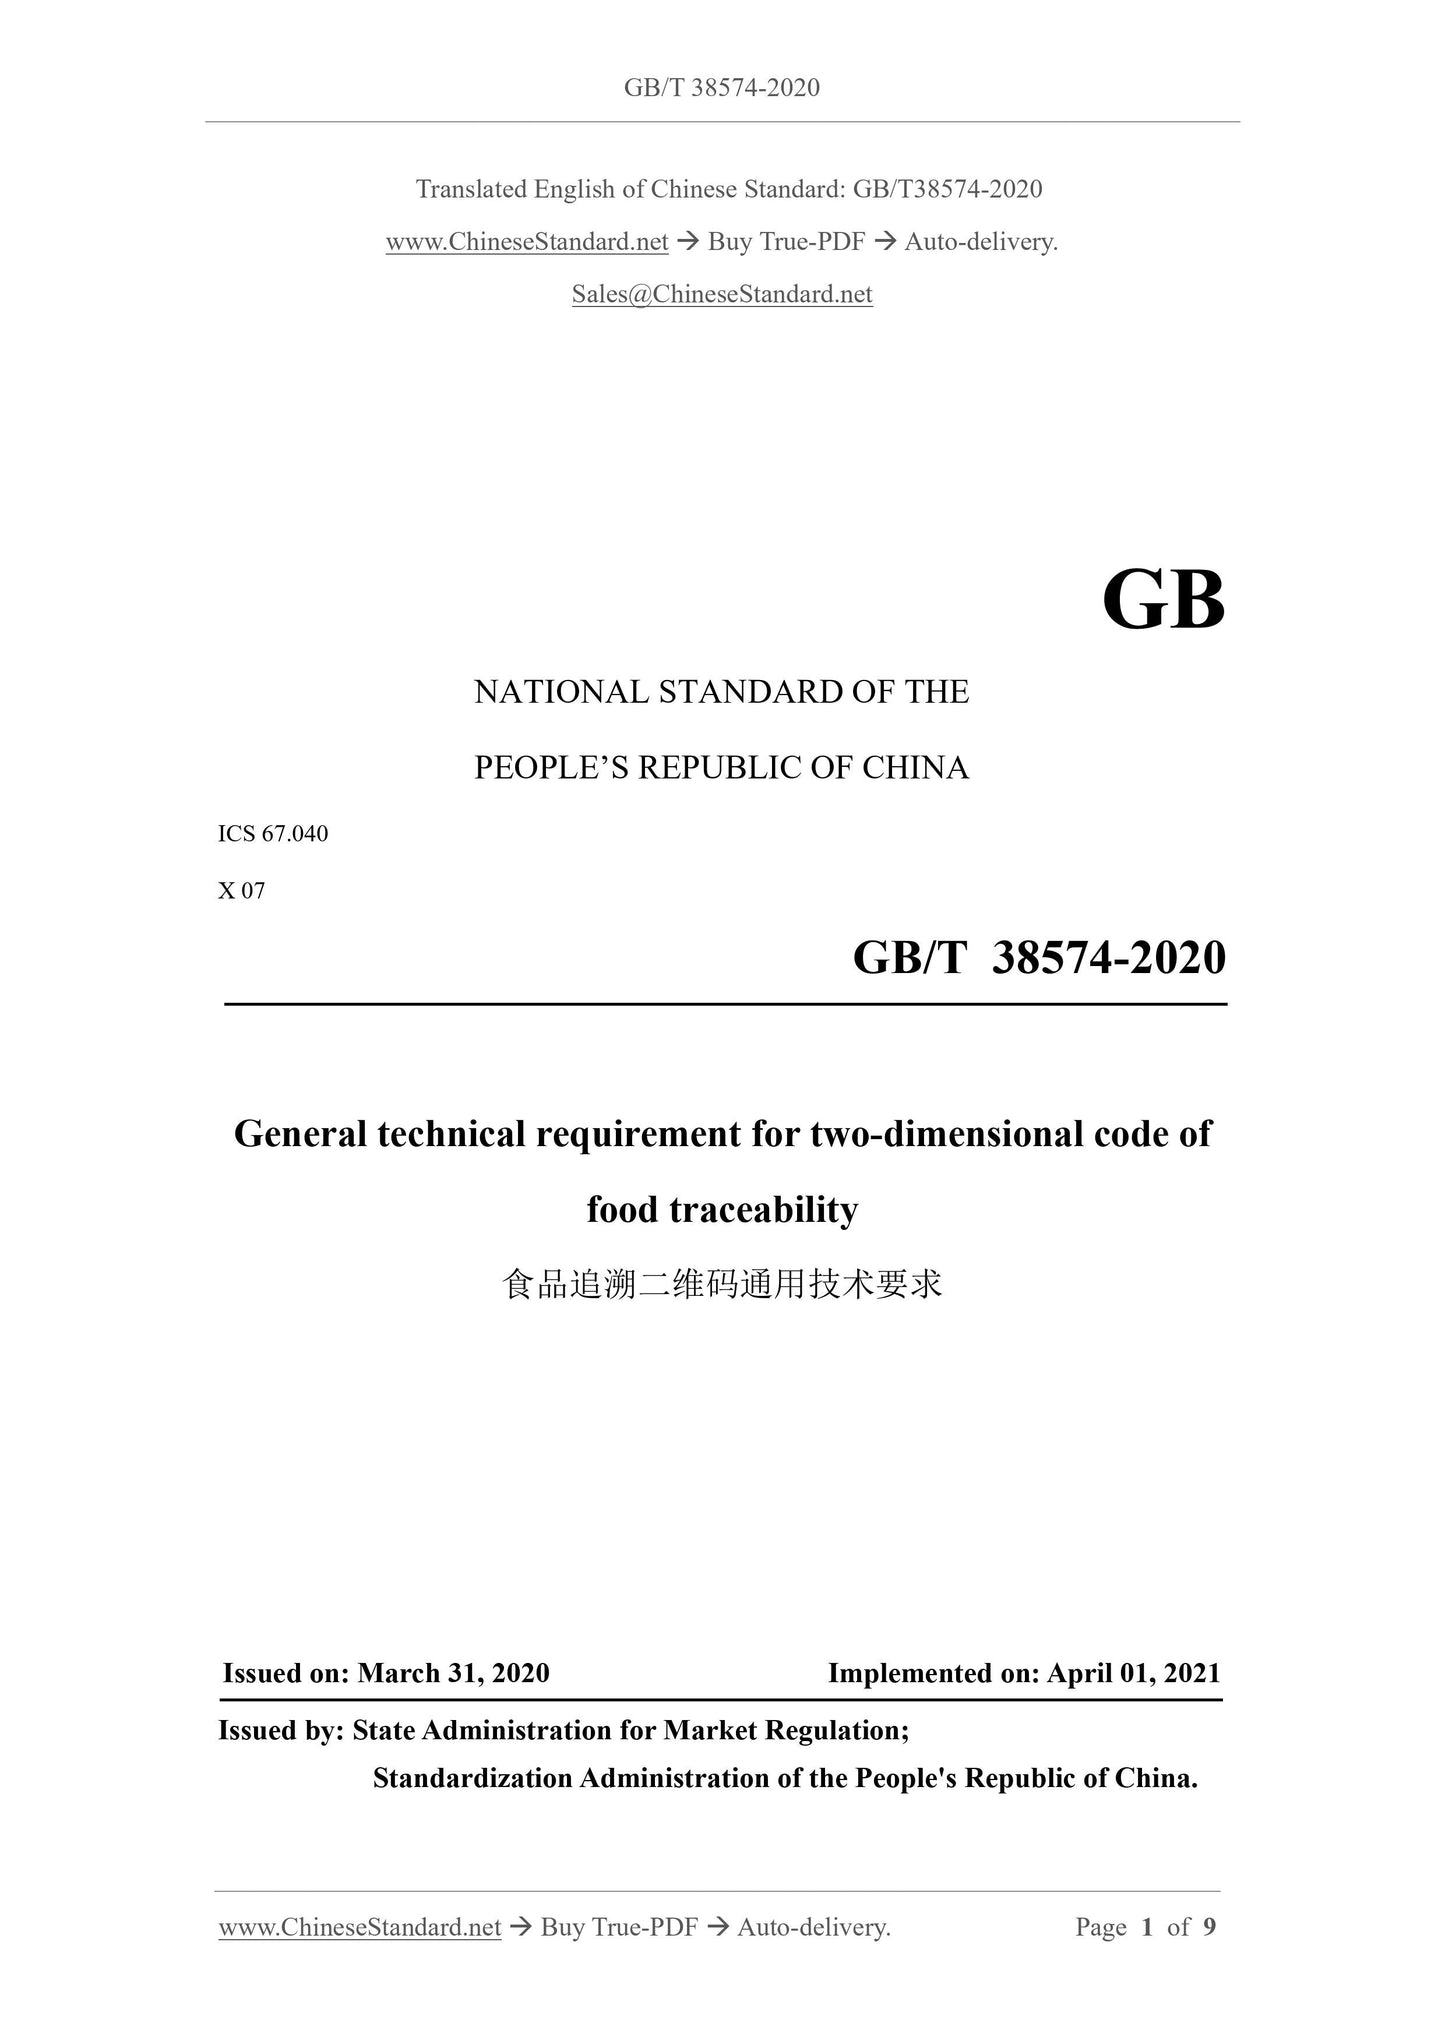 GB/T 38574-2020 Page 1